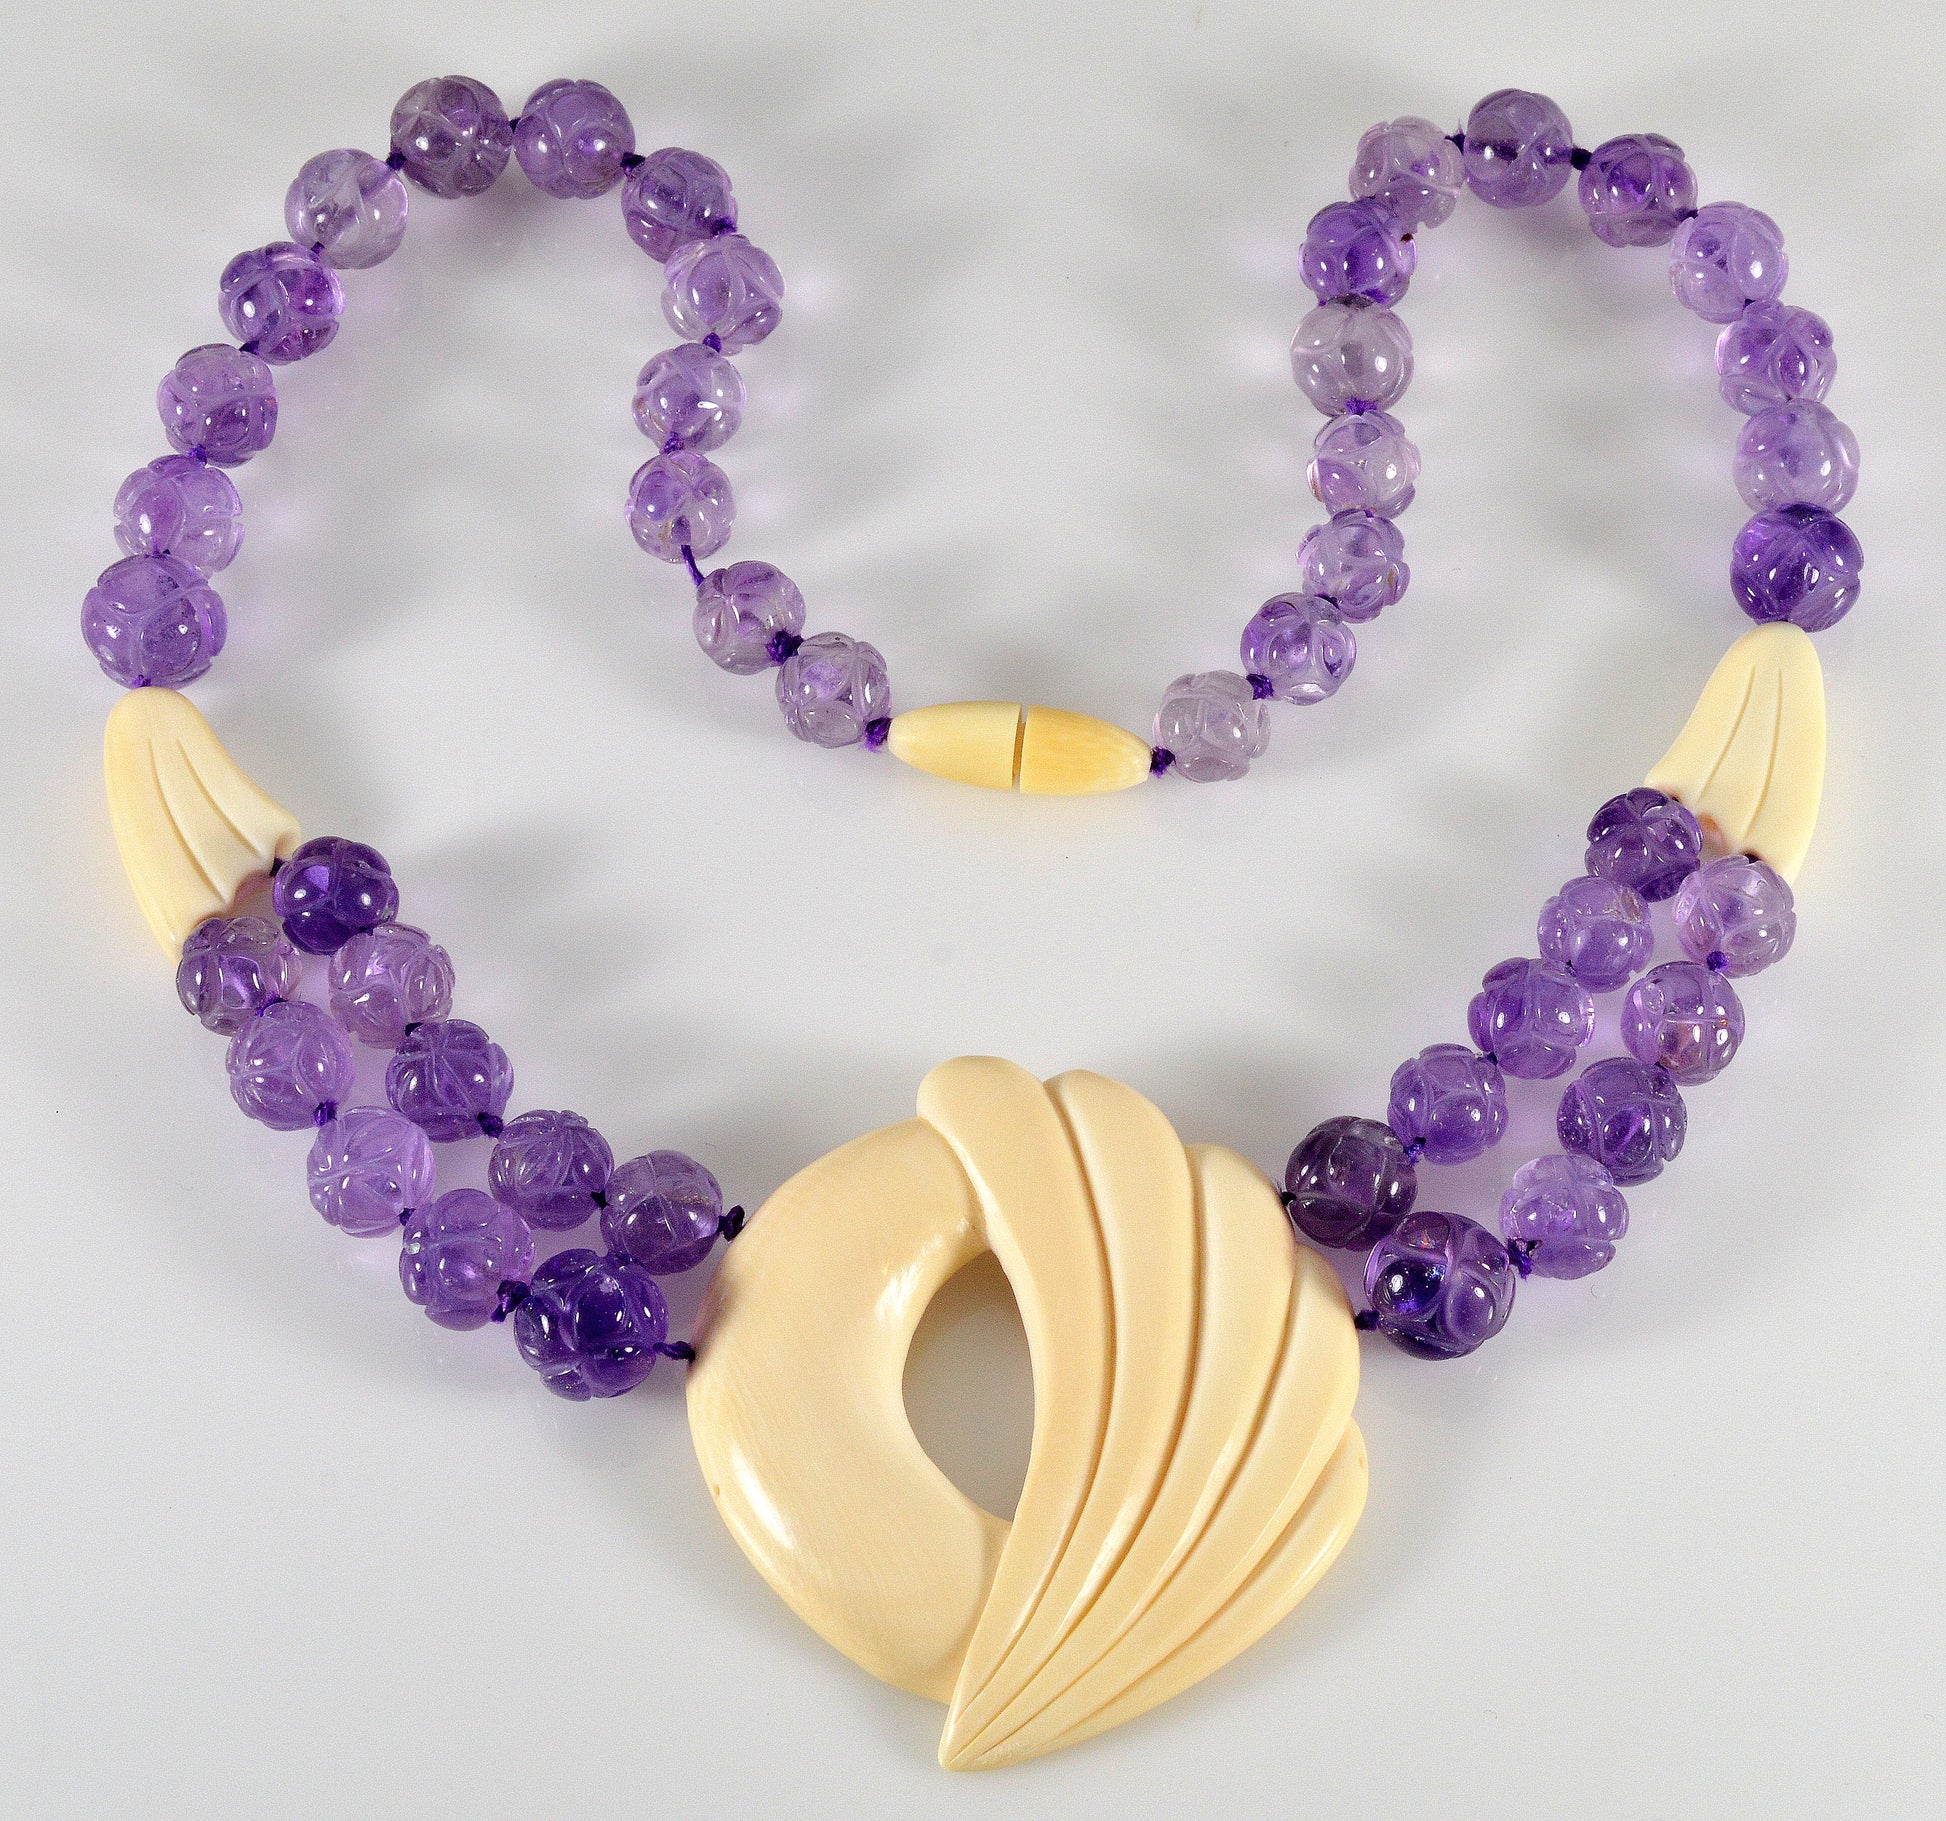 Antique Art Deco Carved Amethyst Bead Necklace C.1920 003568